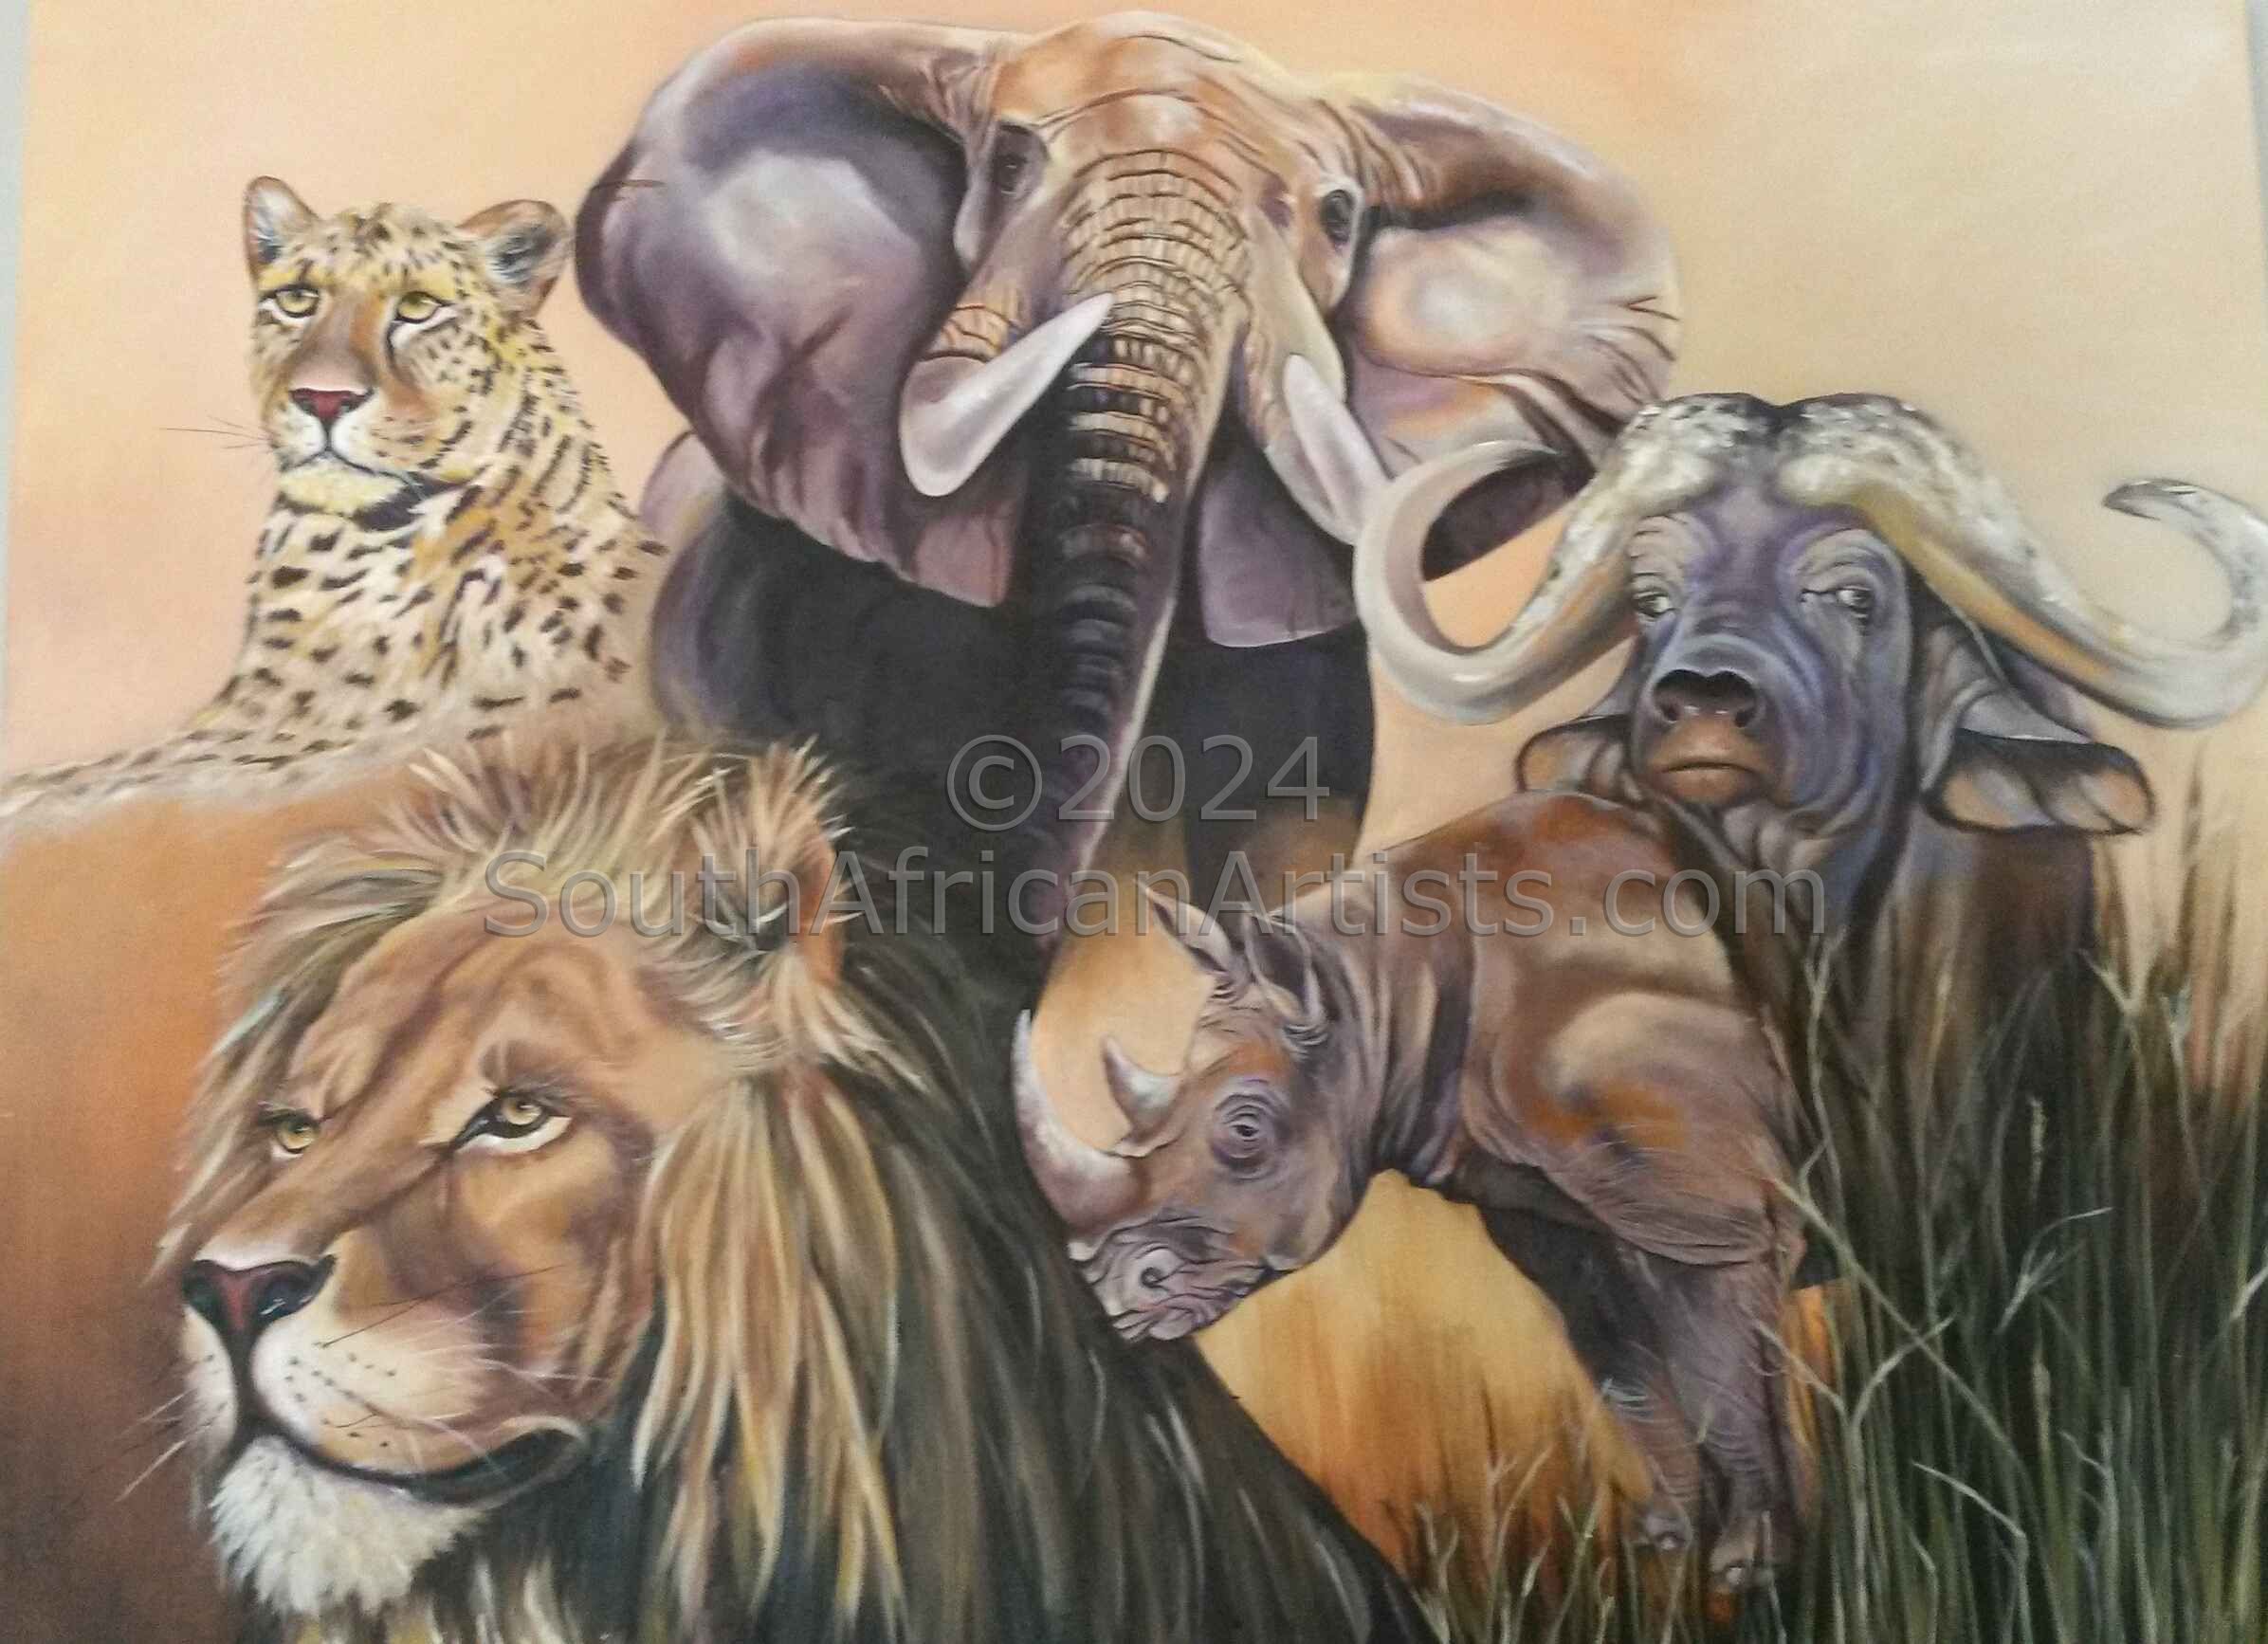 The Big Five of Africa